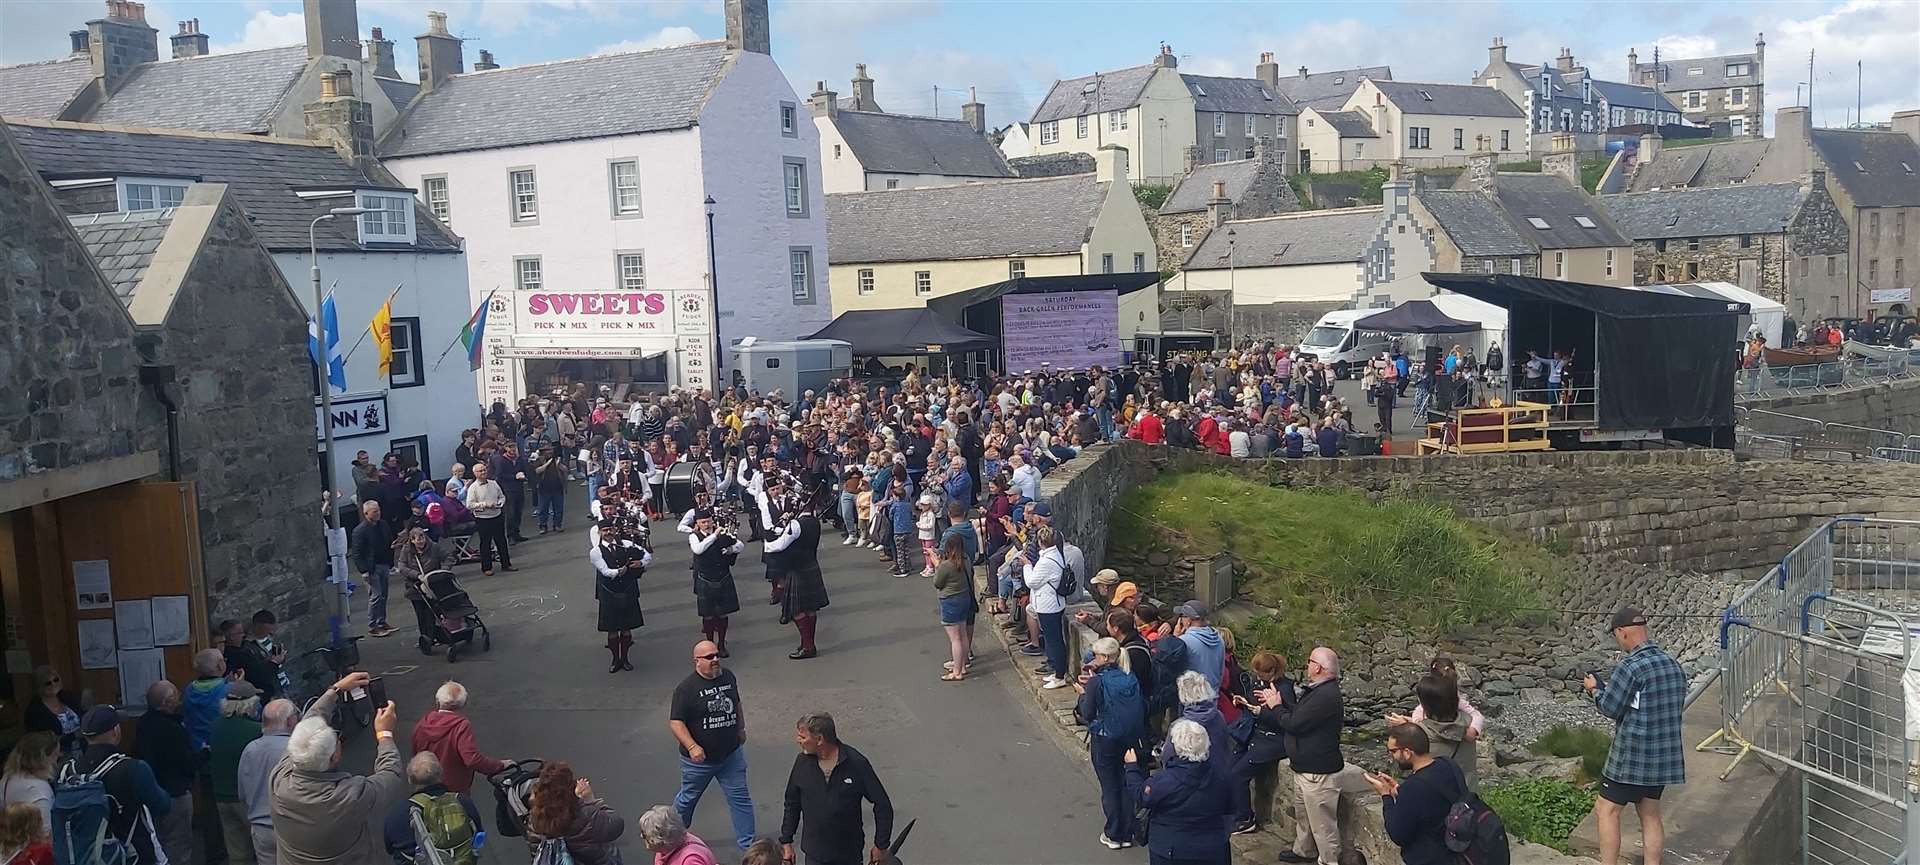 Portsoy Pipe Band played to open the festival.